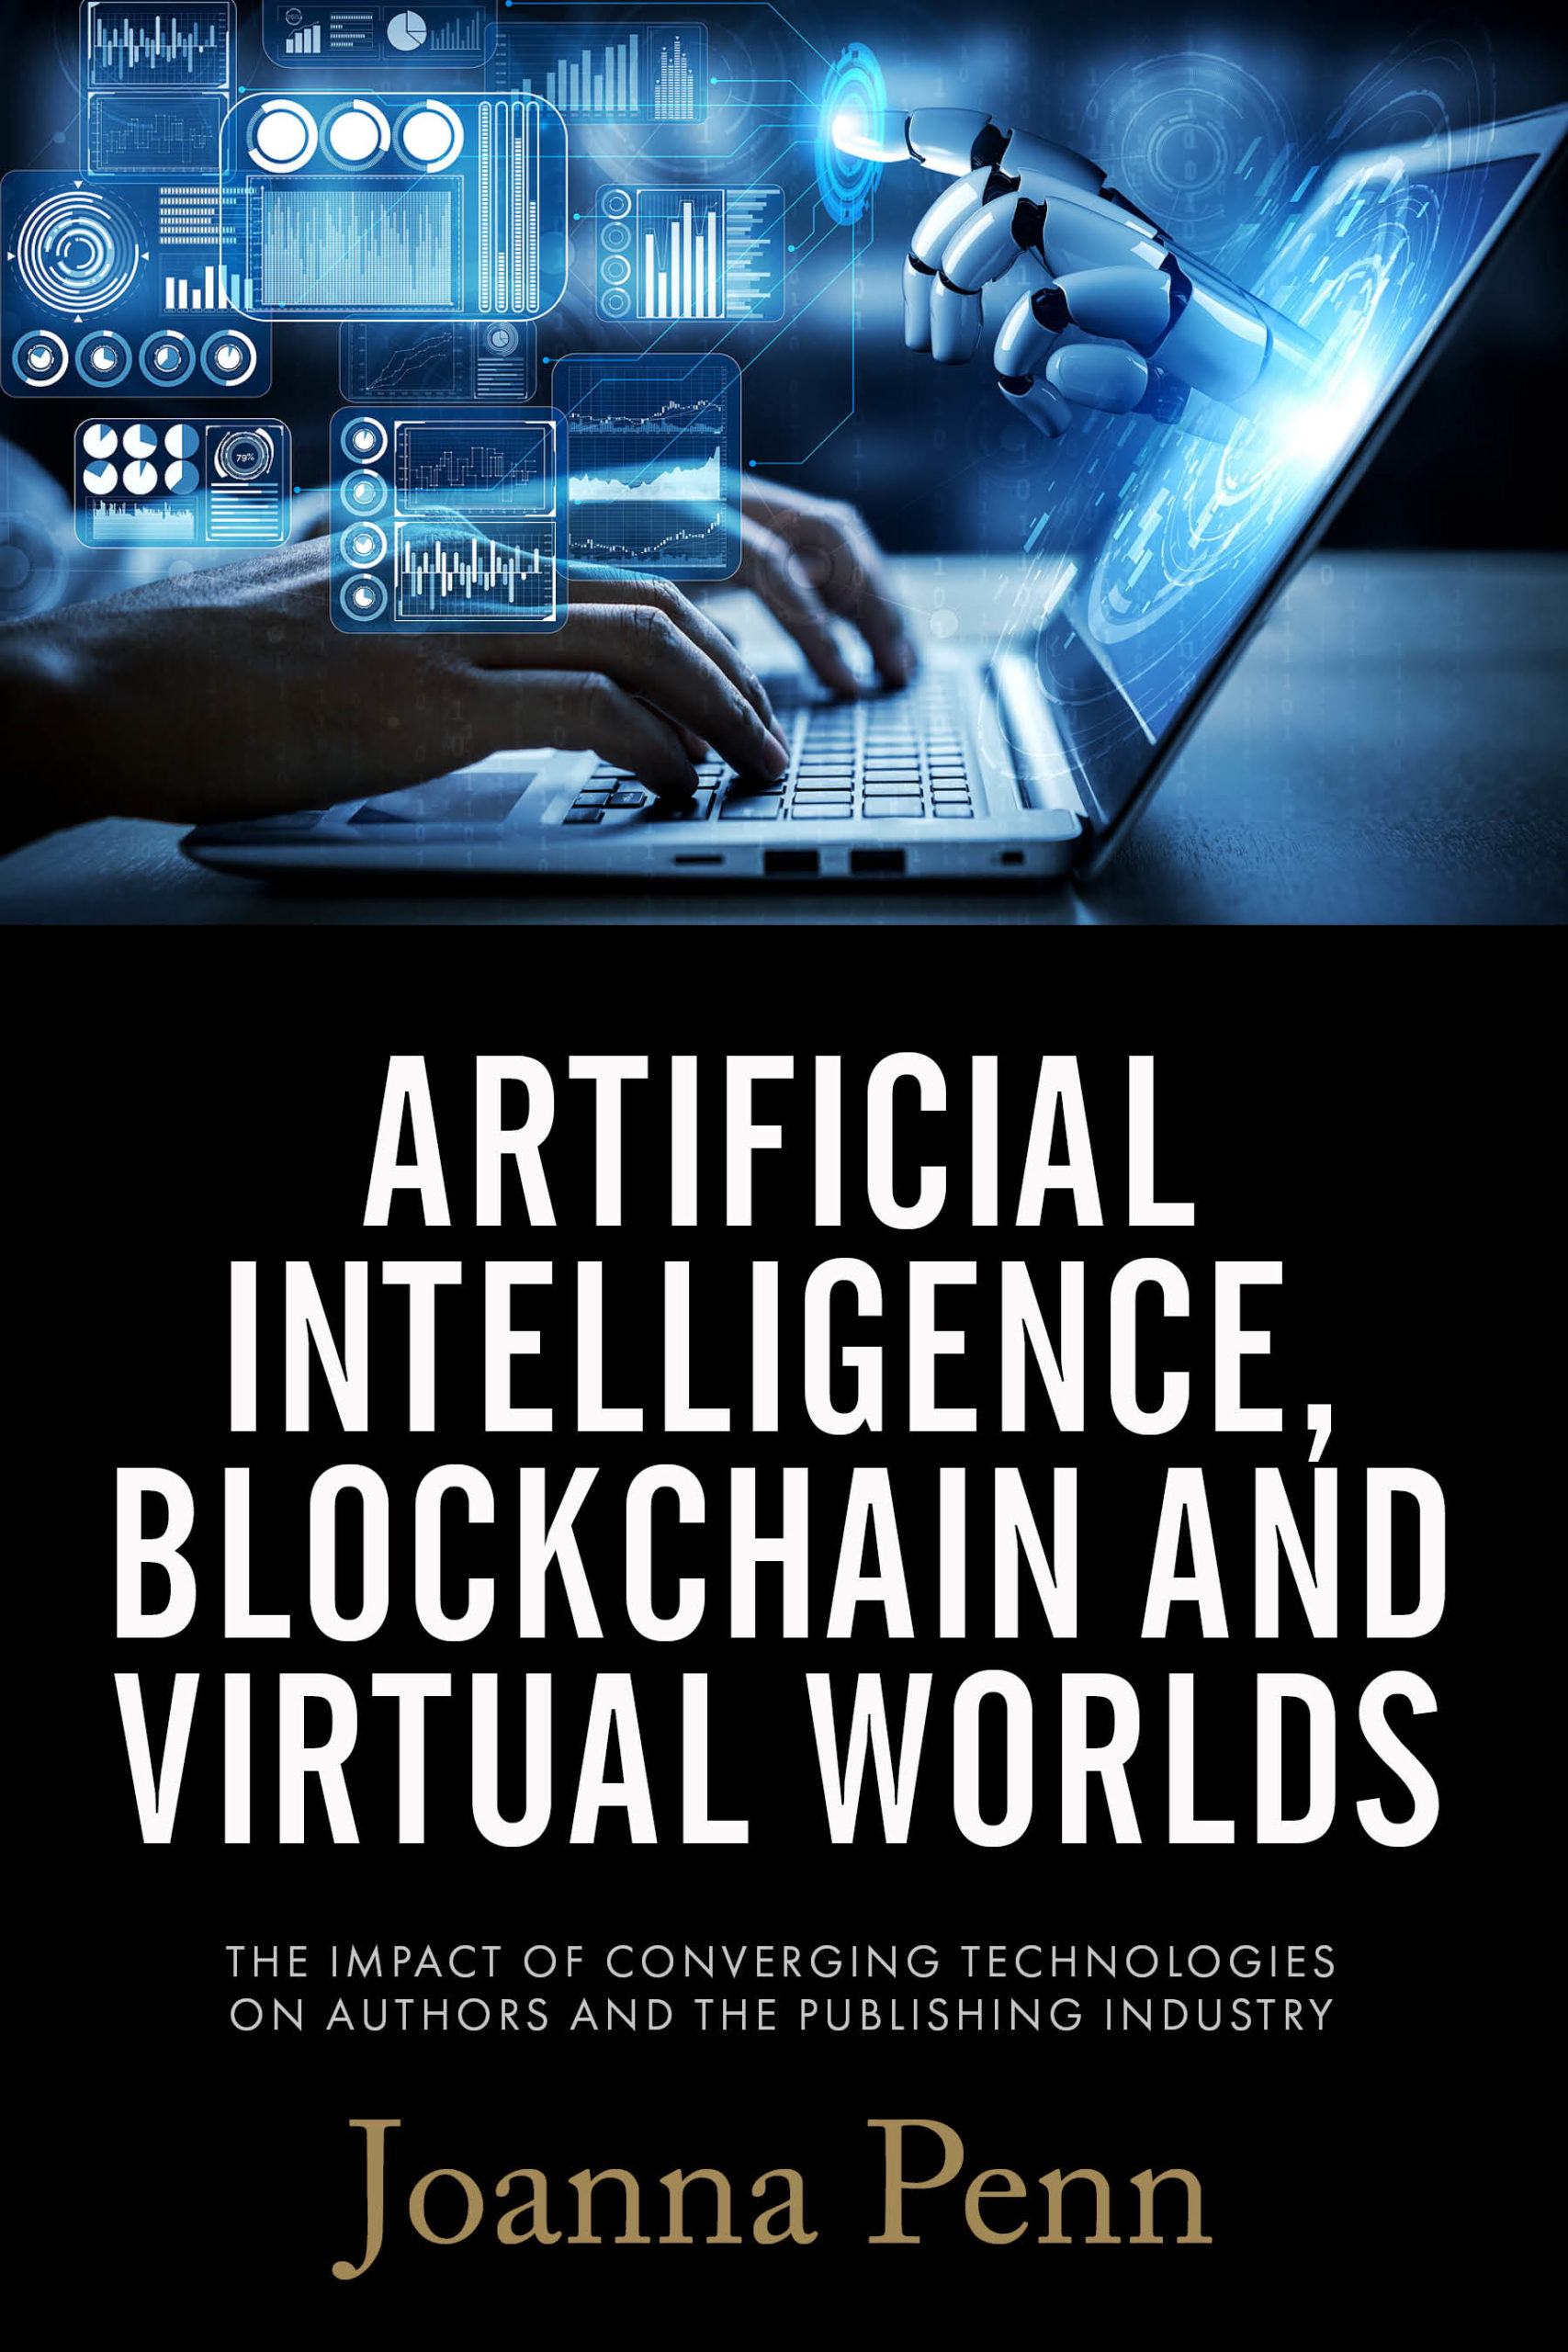 Artificial Intelligence, Blockchain, and Virtual Worlds by Joanna Penn